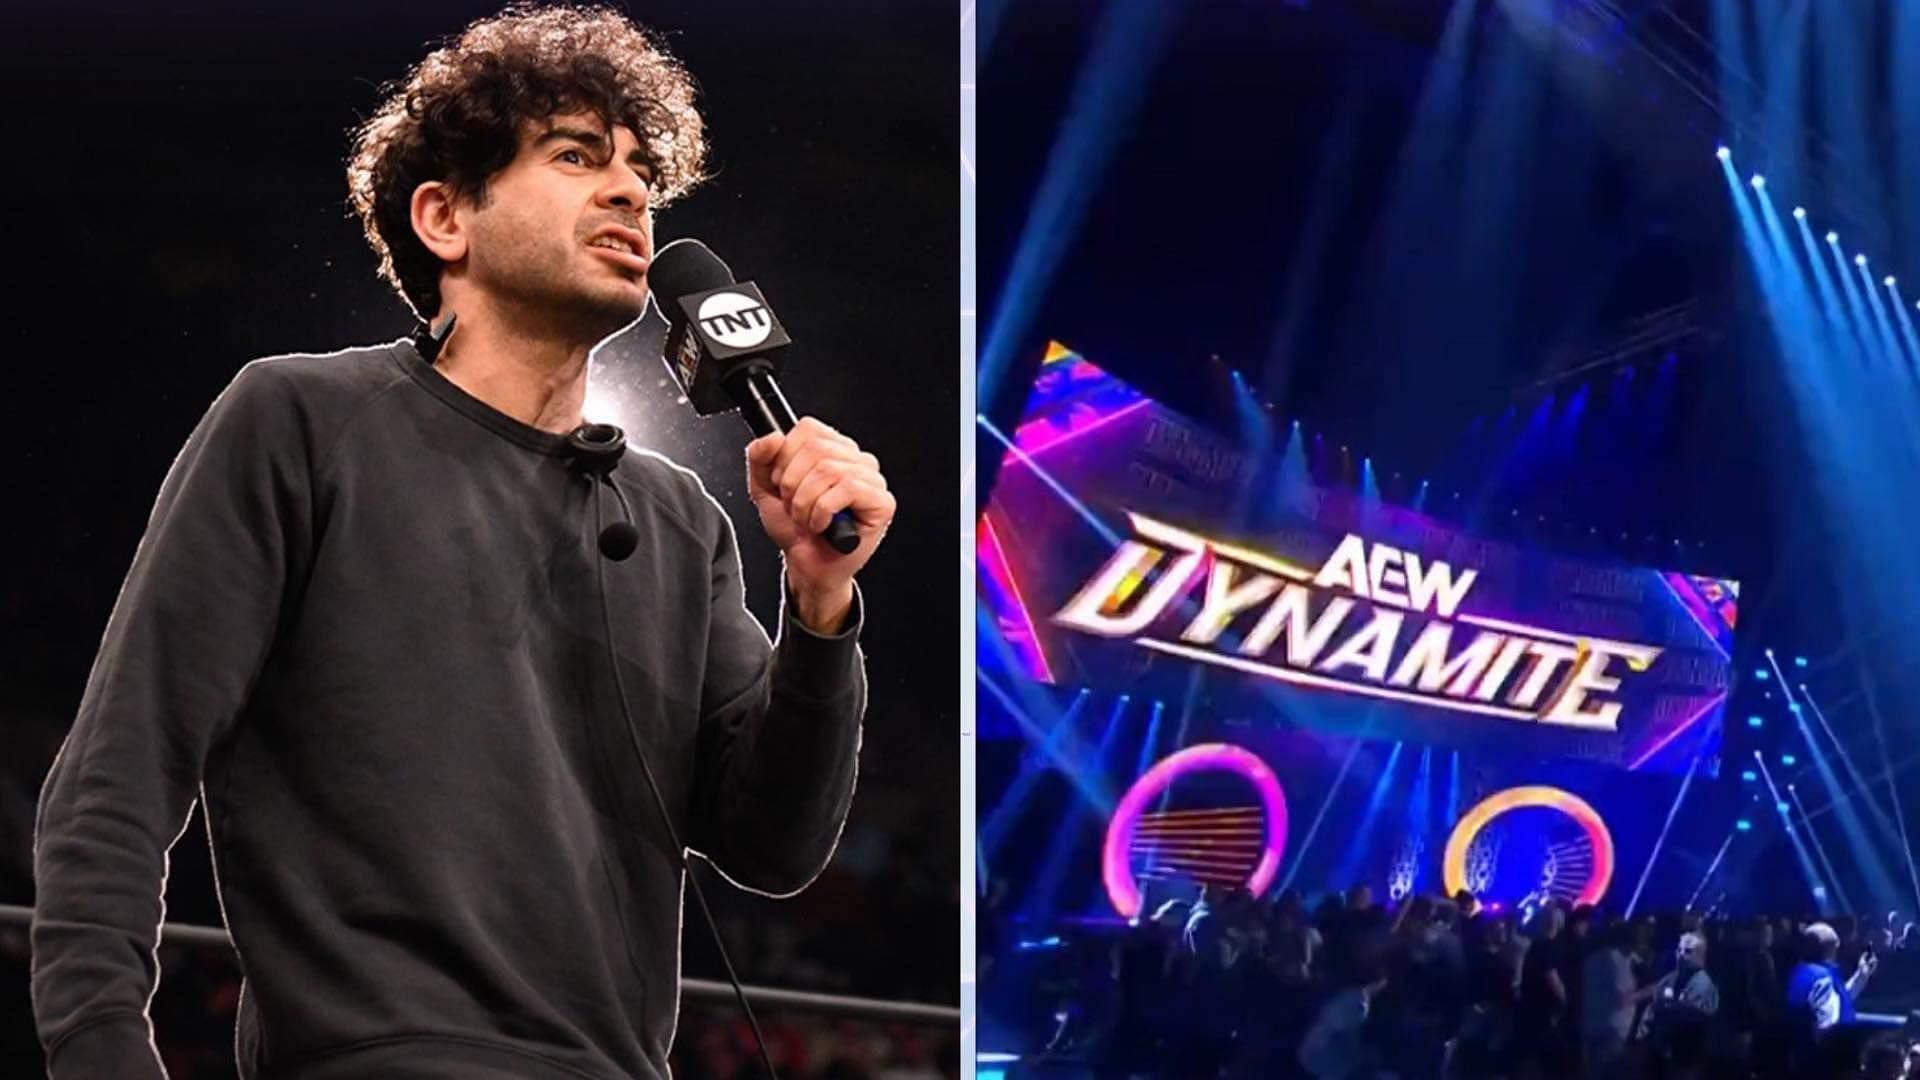 Will a former WWE star join AEW soon?